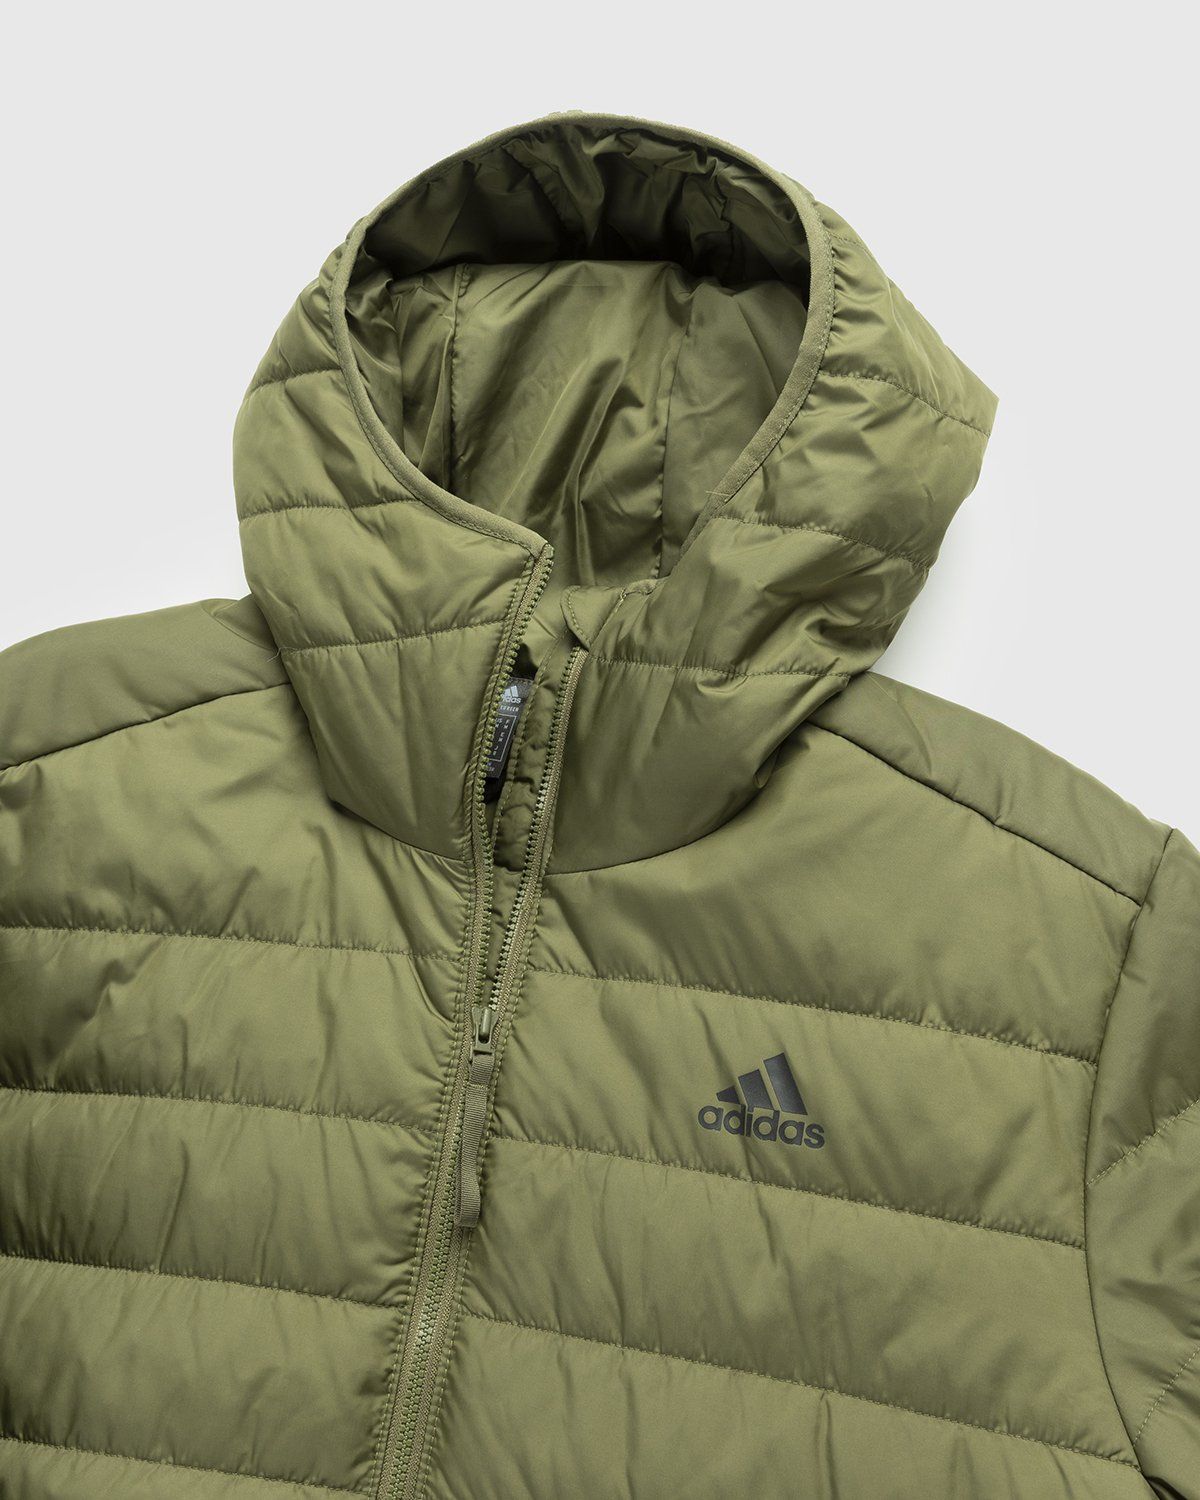 Adidas – Itavic 3-Stripes Midweight Hooded Jacket Olive - Down Jackets - Green - Image 3